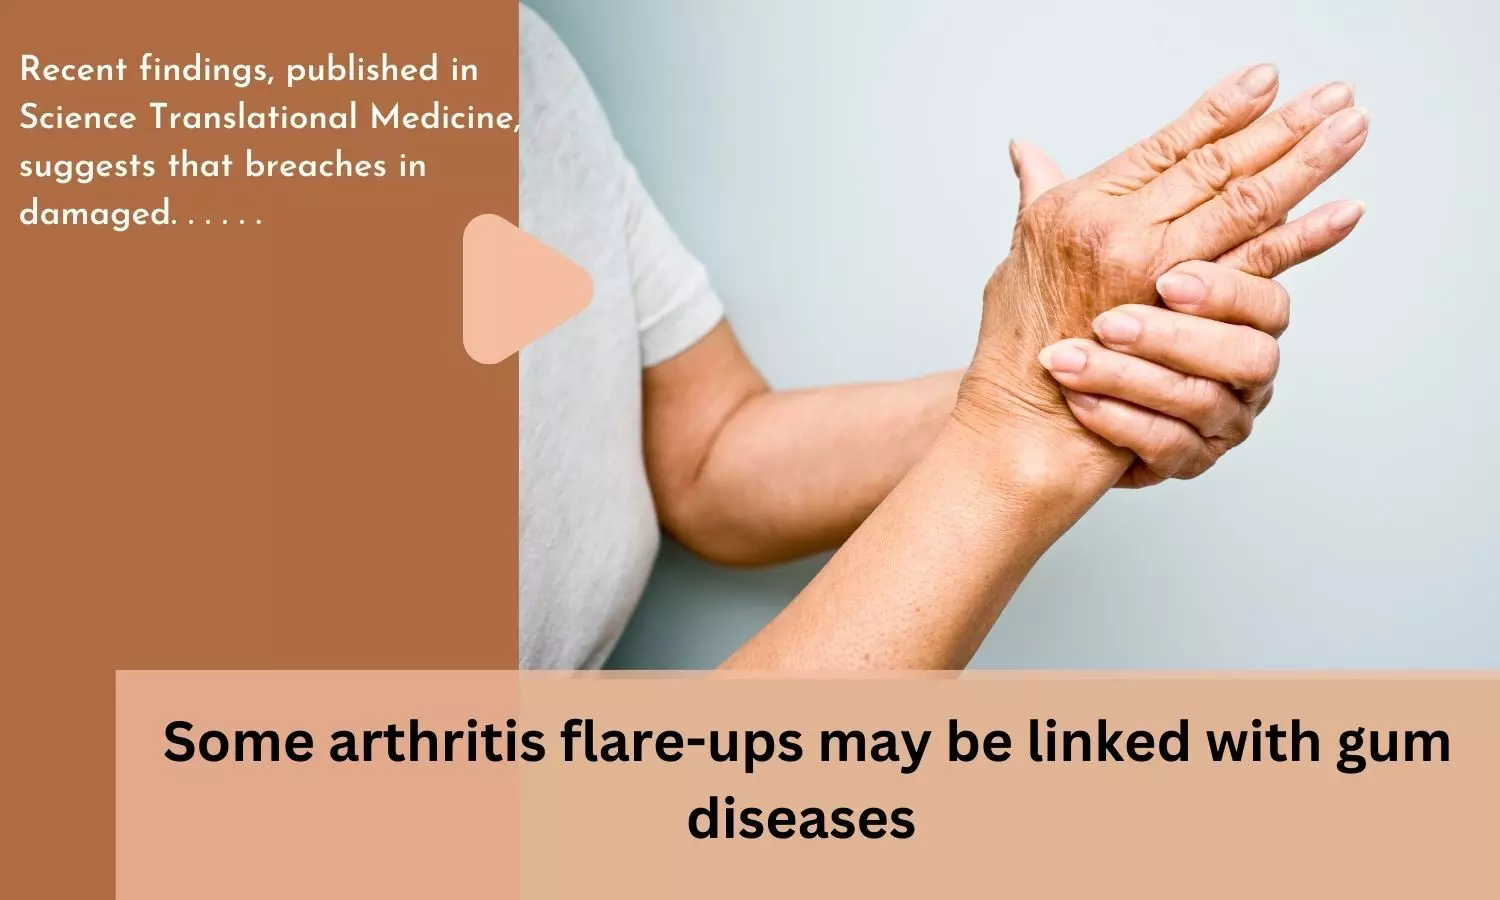 Some arthritis flare-ups may be linked with gum diseases